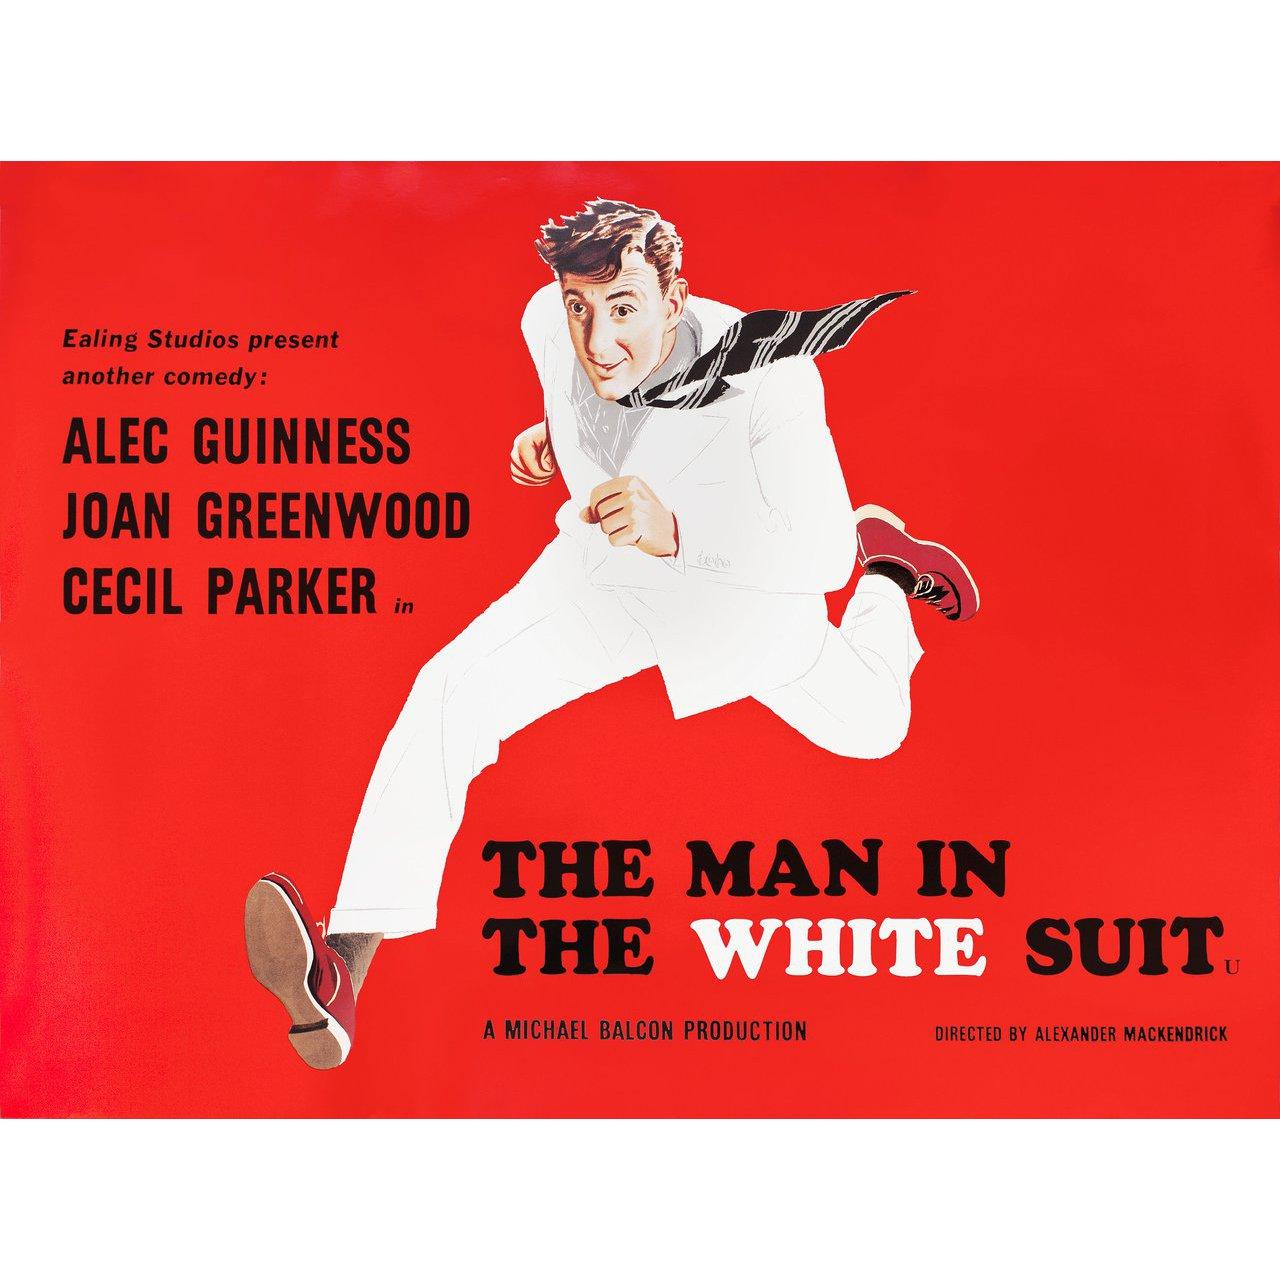 Original 1980s re-release British quad poster by A.R. Thomson / S. John Woods for the 1951 film The Man in the White Suit directed by Alexander Mackendrick with Alec Guinness / Joan Greenwood / Cecil Parker / Michael Gough. Very Good-Fine condition,